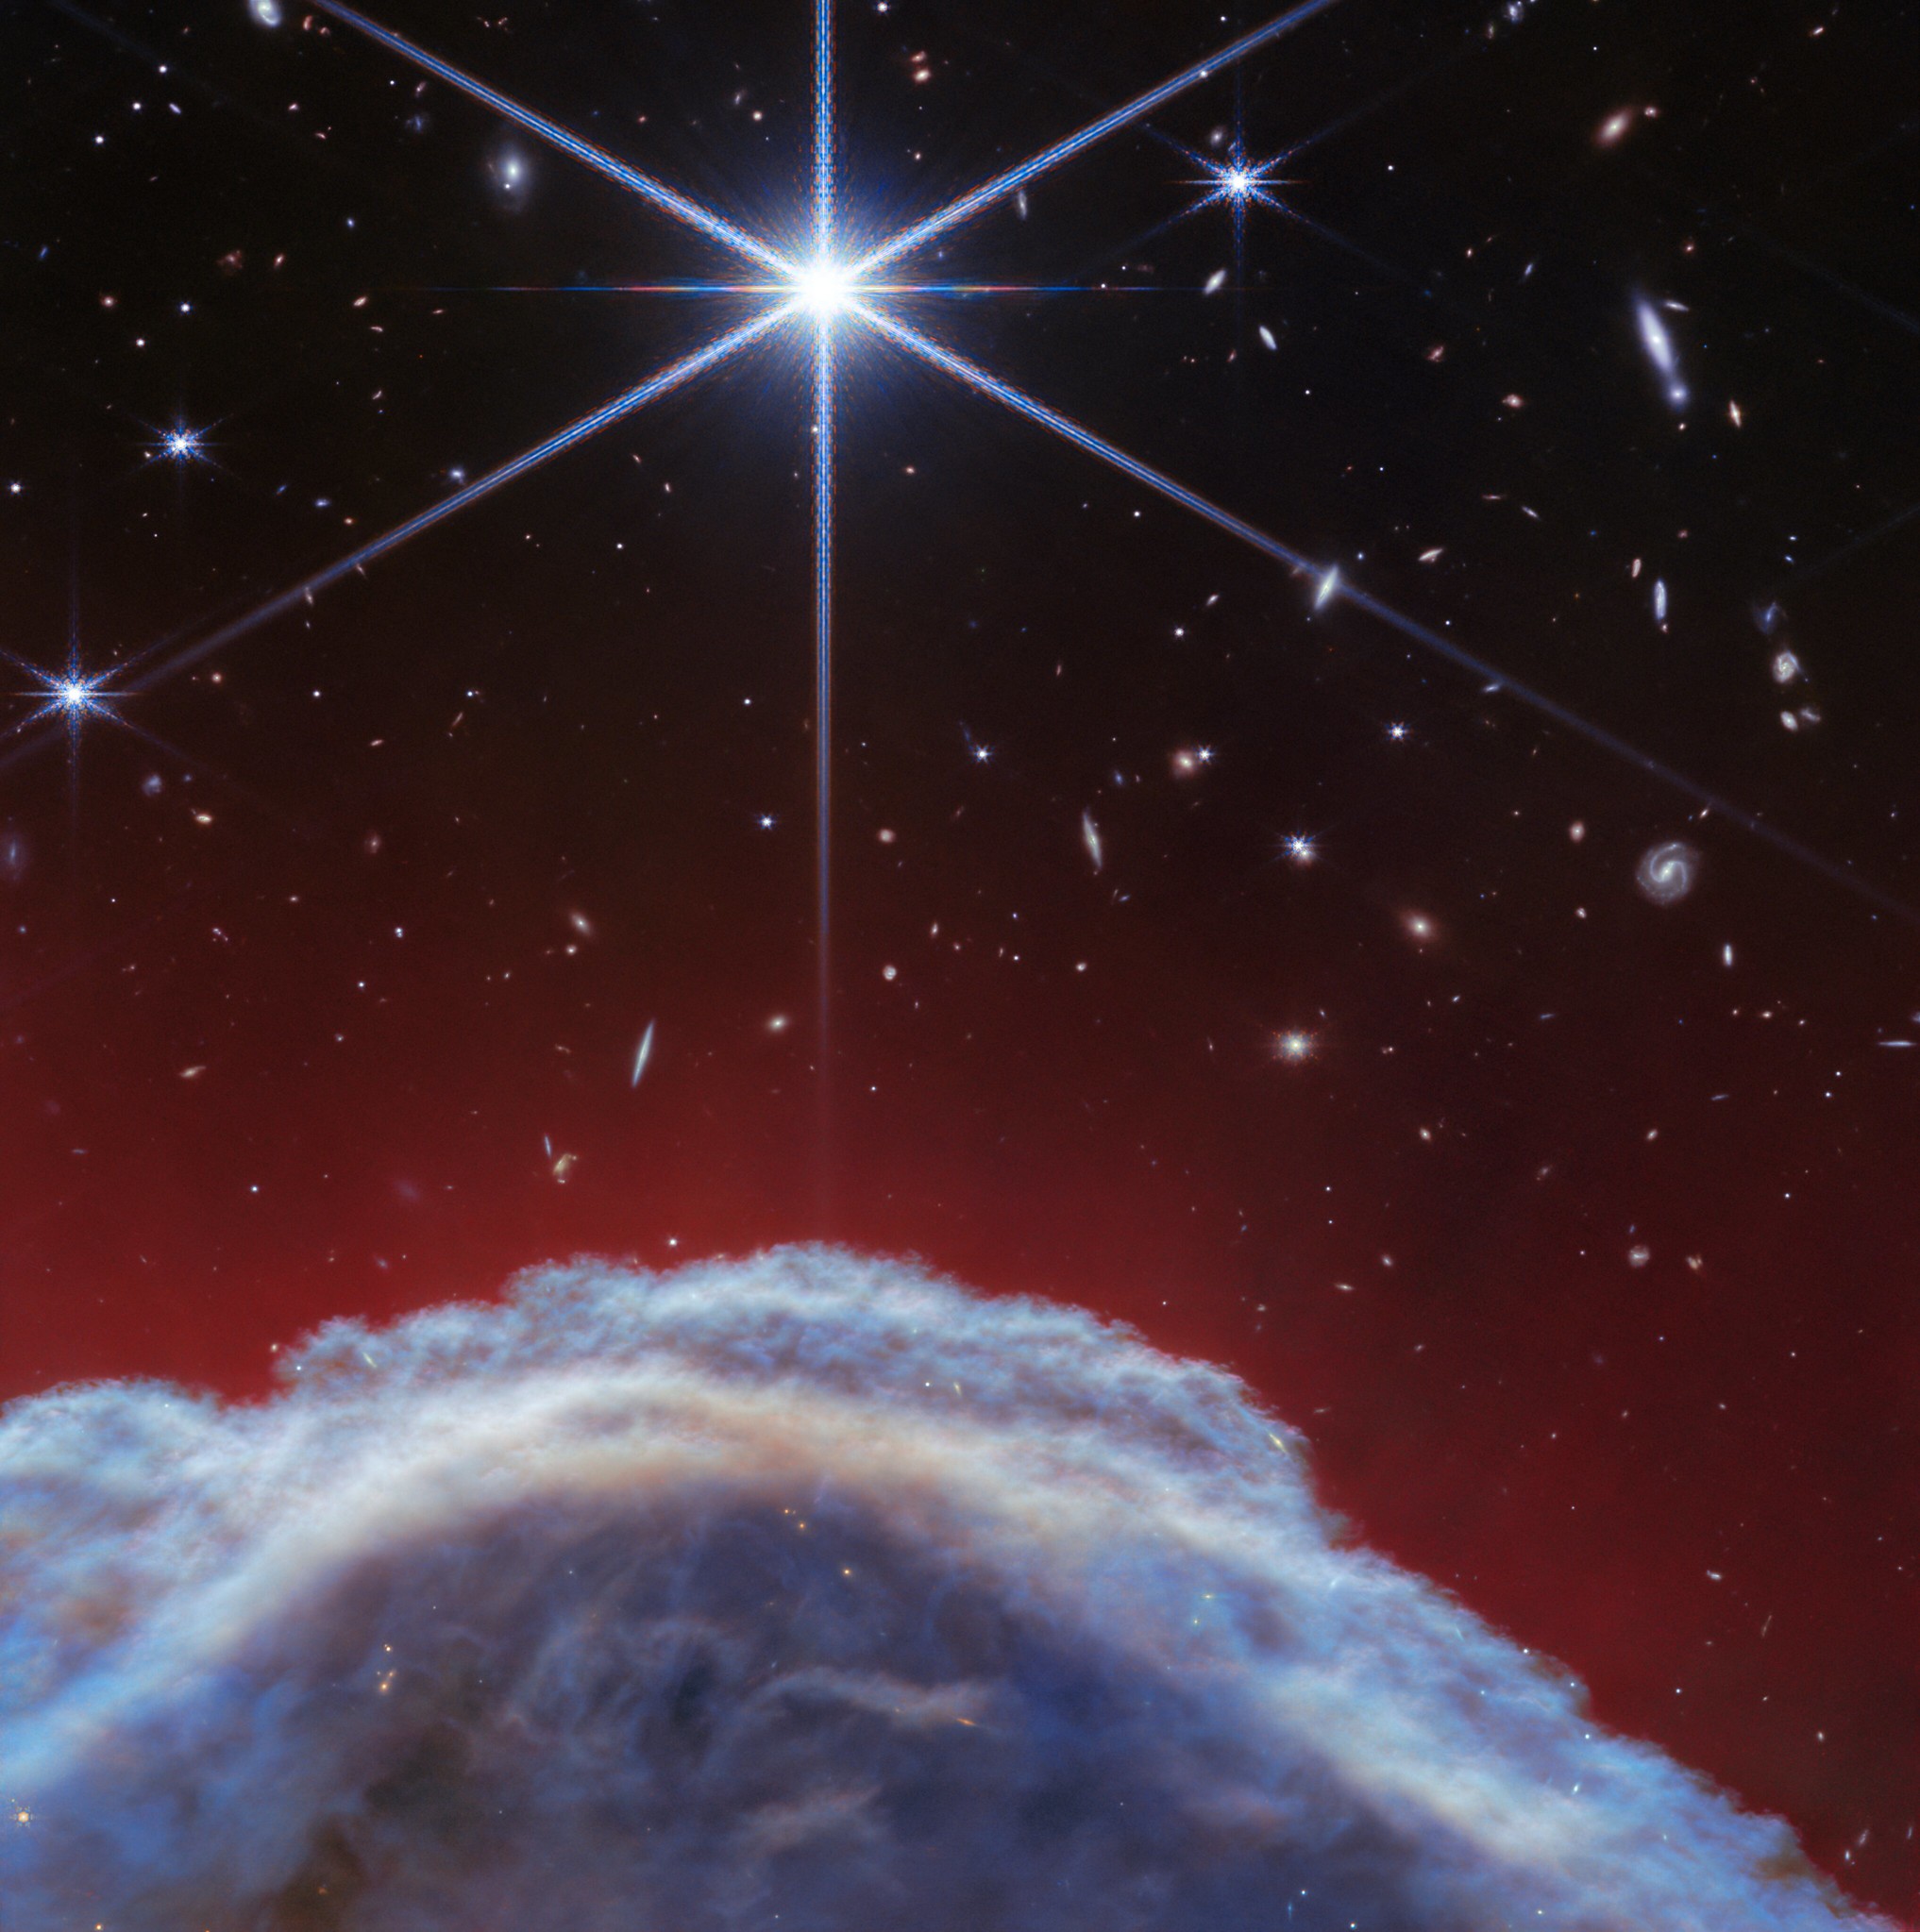 About a third of the way up, a lumpy dome of blue-gray clouds rises.  Above this, striped, translucent red strands brush up about halfway across the image.  The top half of the image is the black background of space with one prominent, bright white star with Webb's 8-point diffraction peaks.  There are other stars and galaxies scattered throughout the image, although very few can be seen through the thick clouds at the bottom and all are considerably smaller than the largest star.